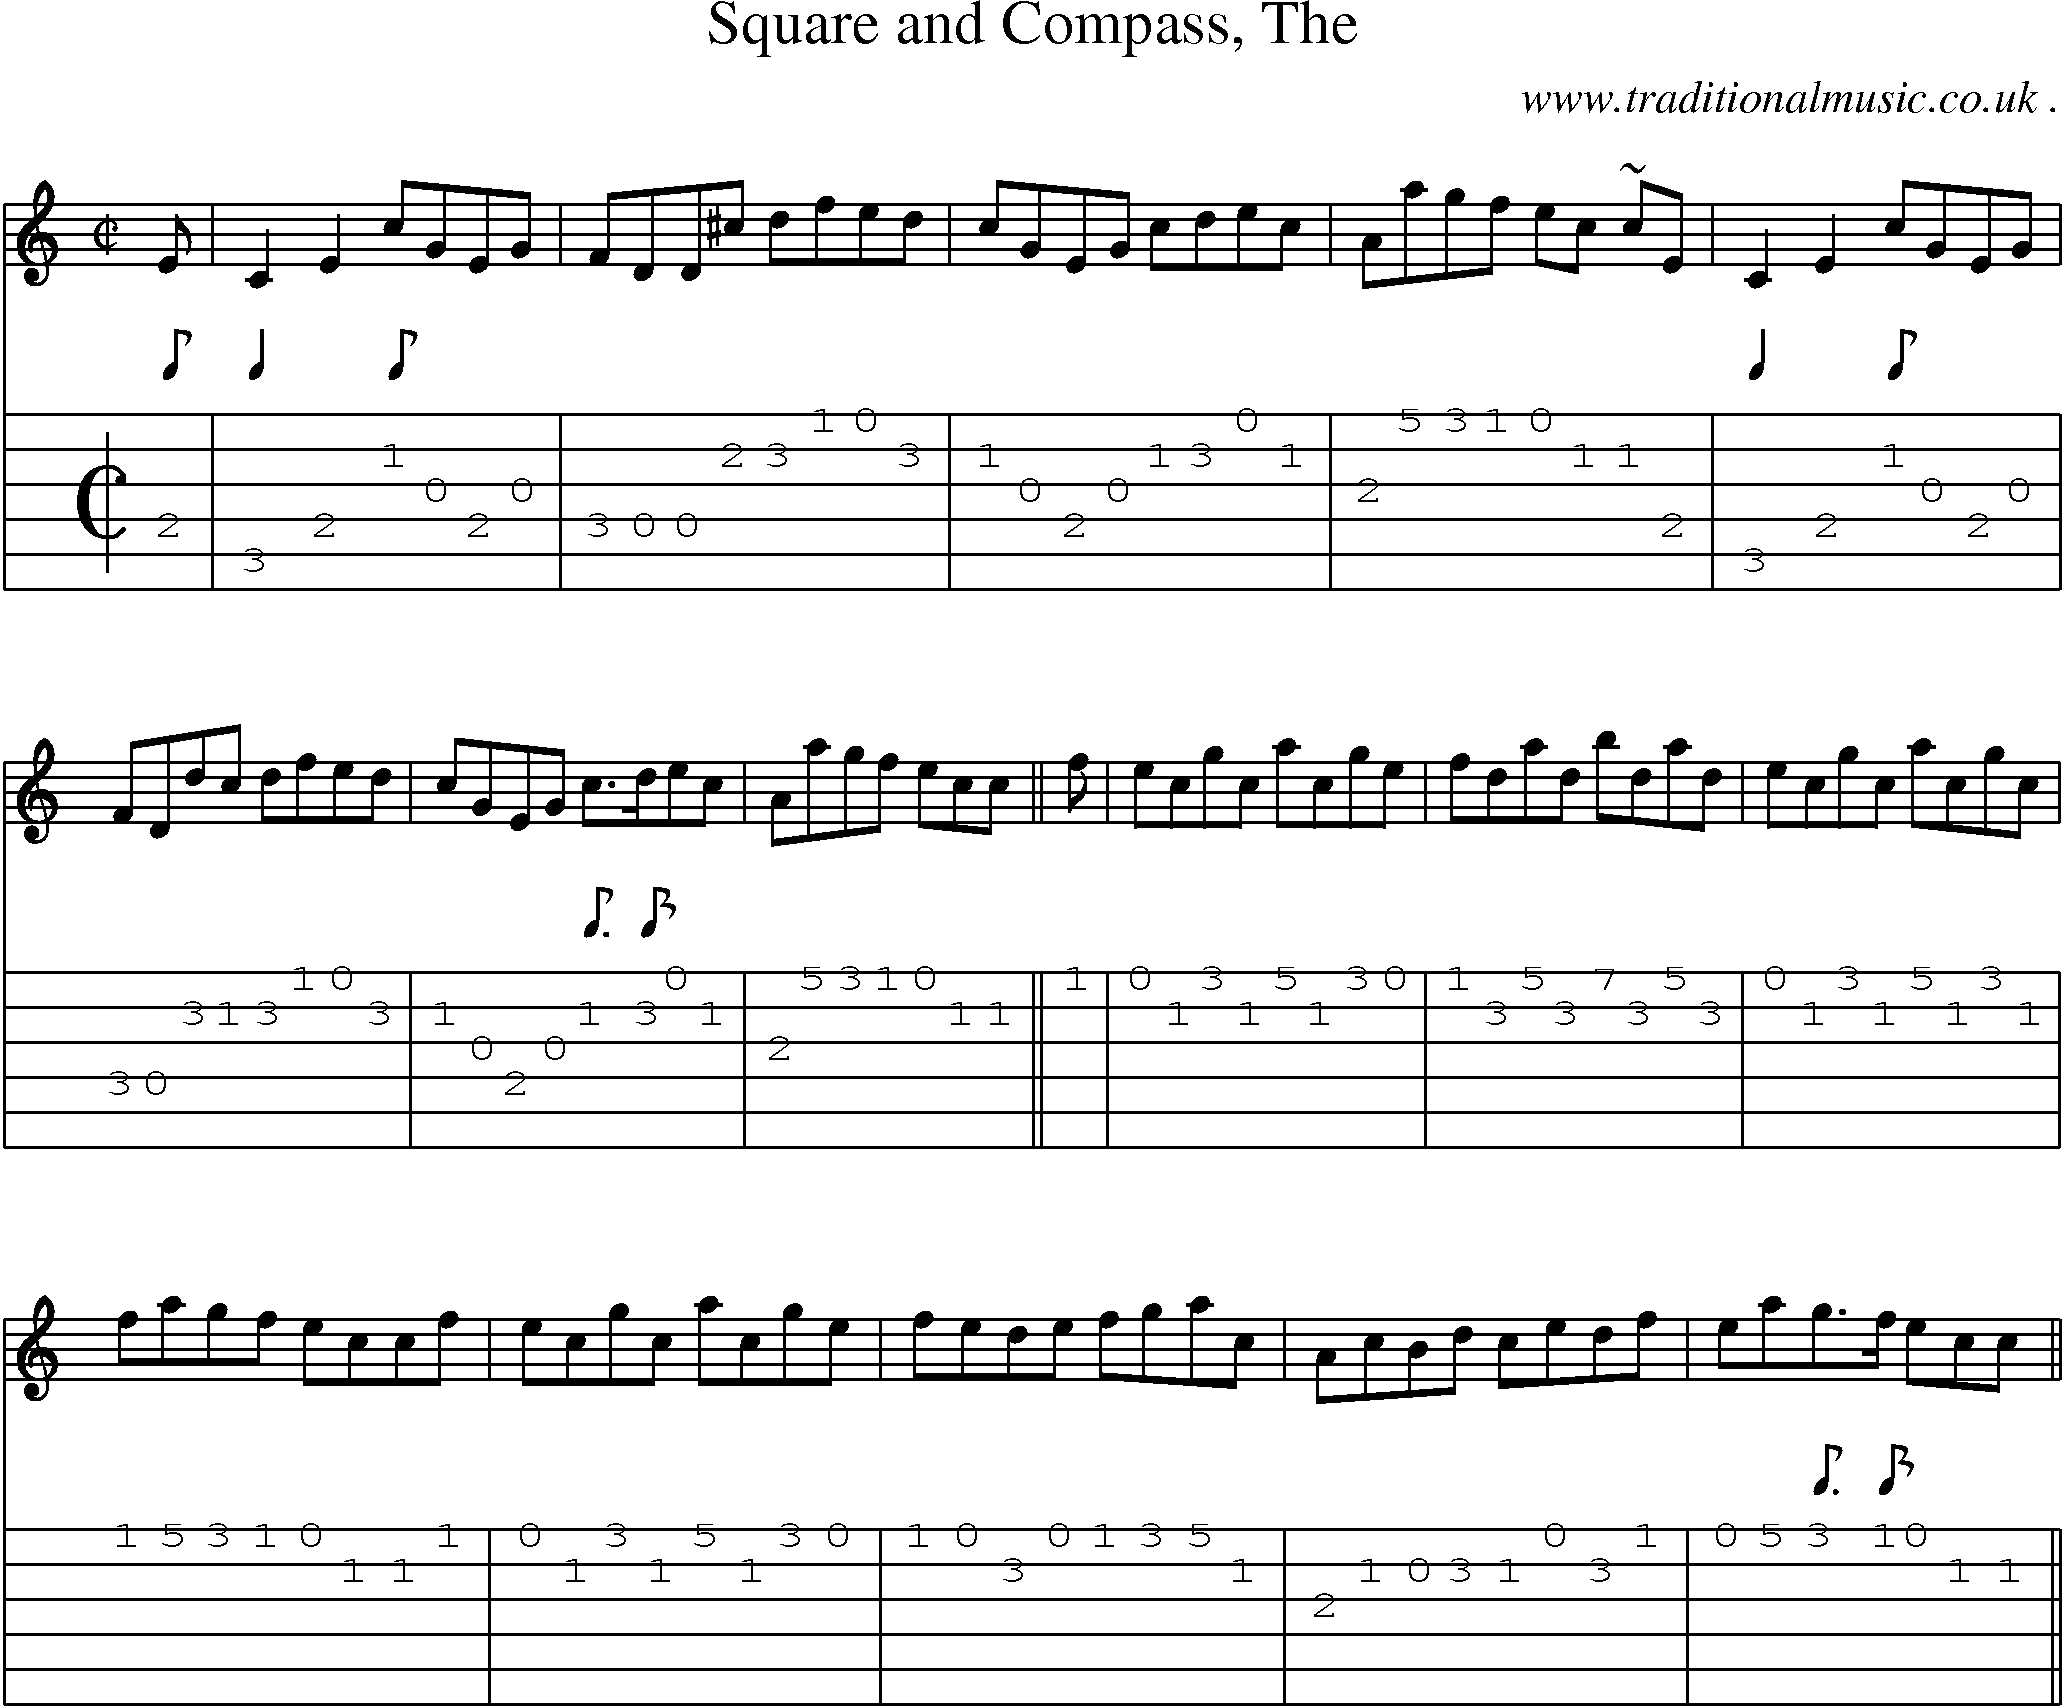 Sheet-music  score, Chords and Guitar Tabs for Square And Compass The